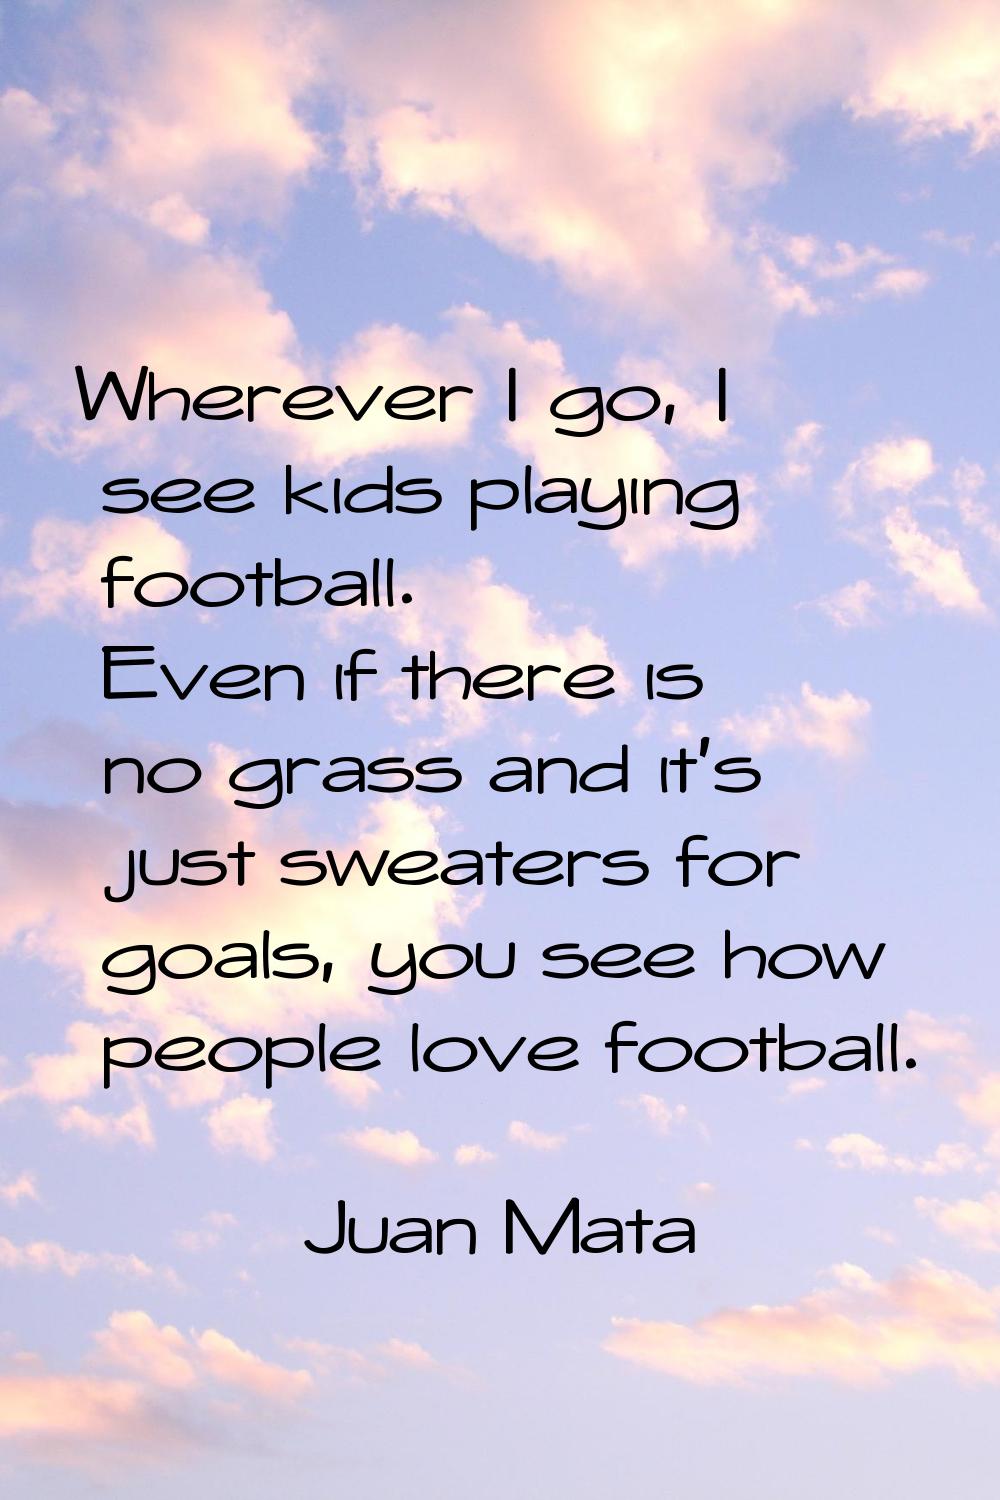 Wherever I go, I see kids playing football. Even if there is no grass and it's just sweaters for go